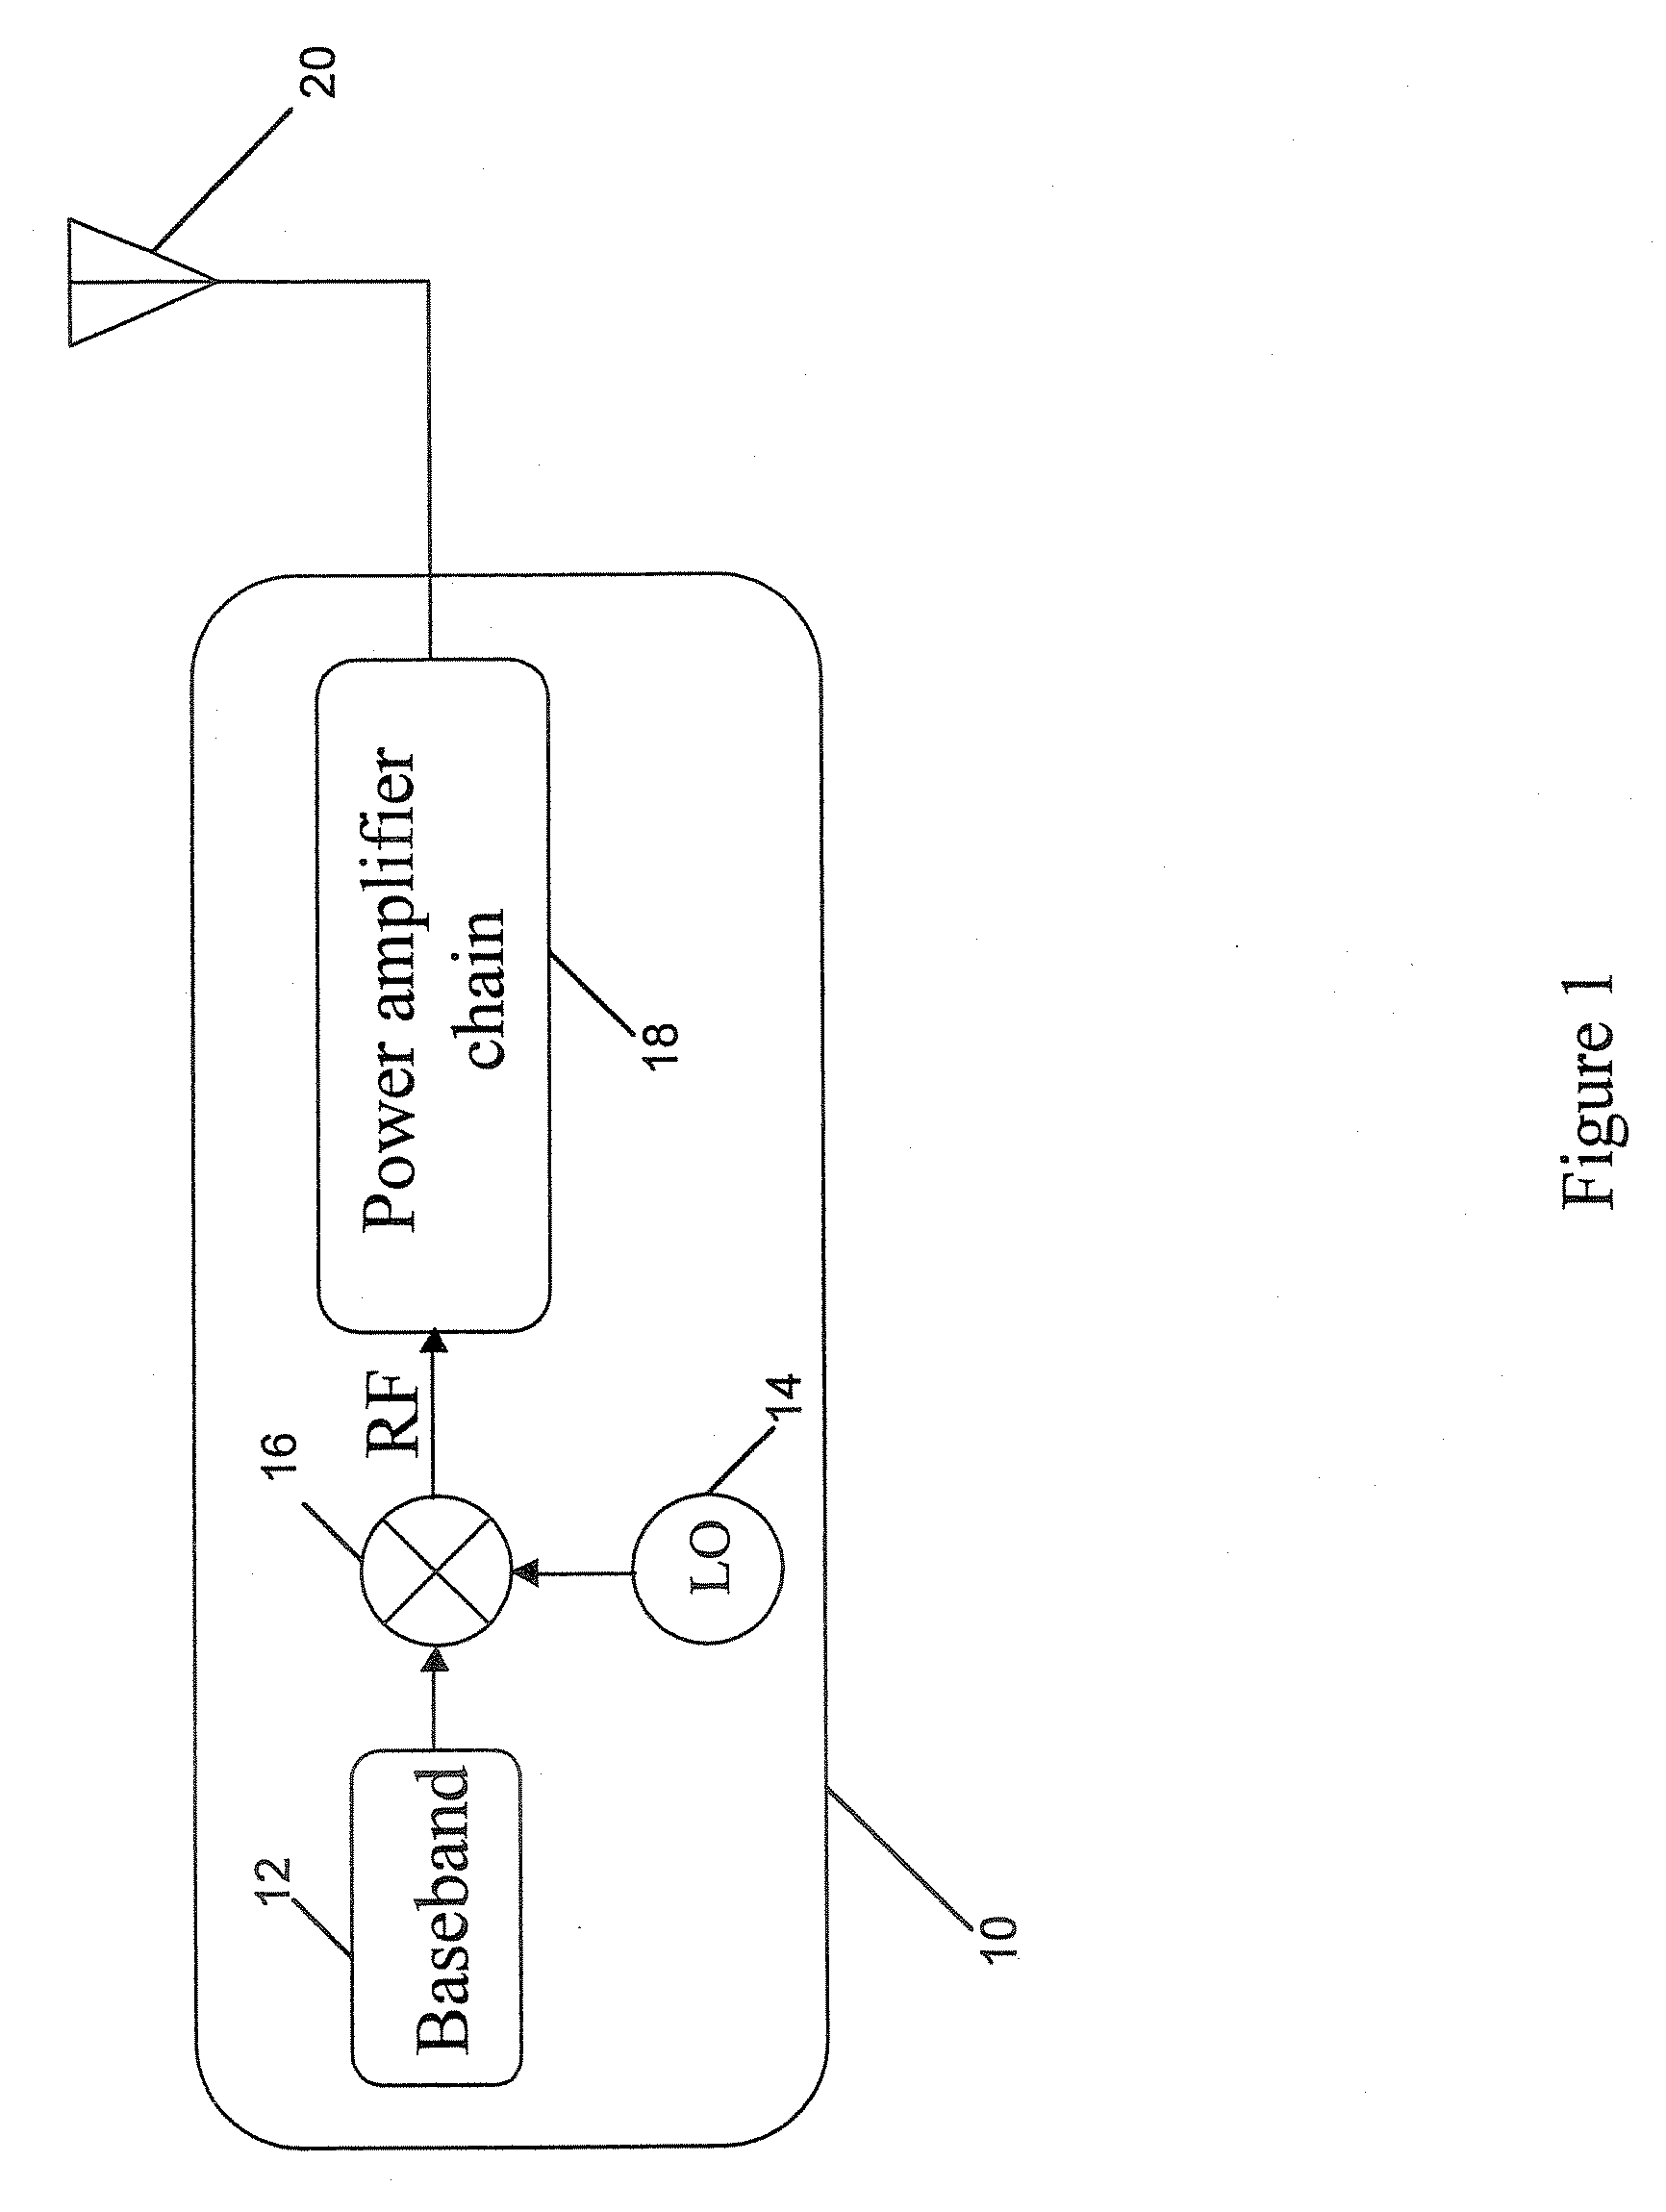 Signal processor for use with a power amplifier in a wireless circuit